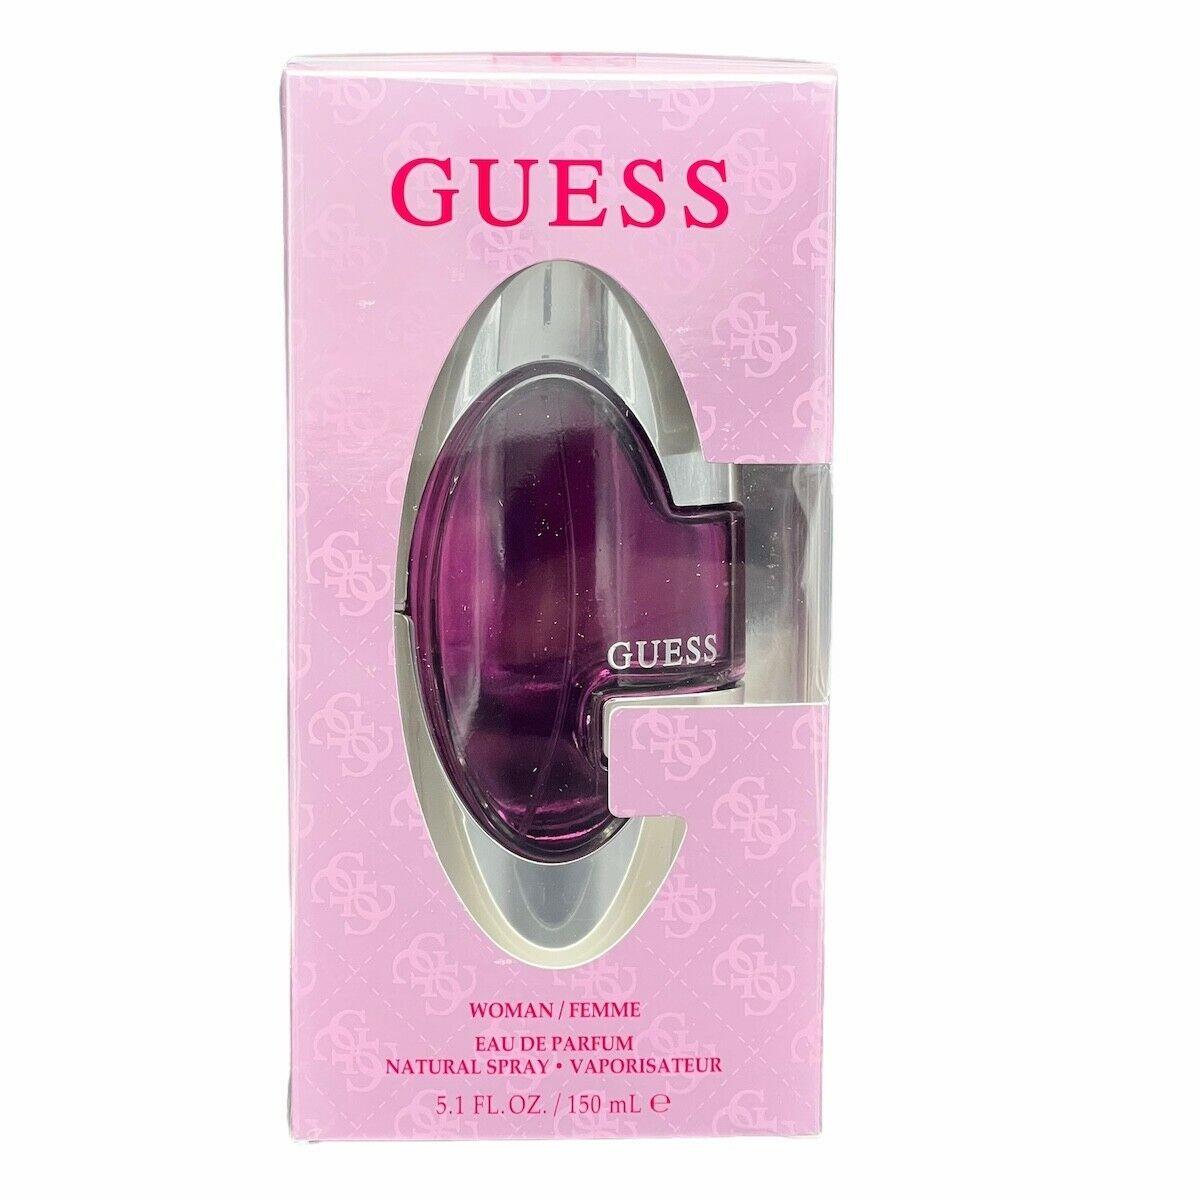 Guess Pink by Guess Women Perfume 5.1oz-150ml Edp Spray Jumbo Size BH46